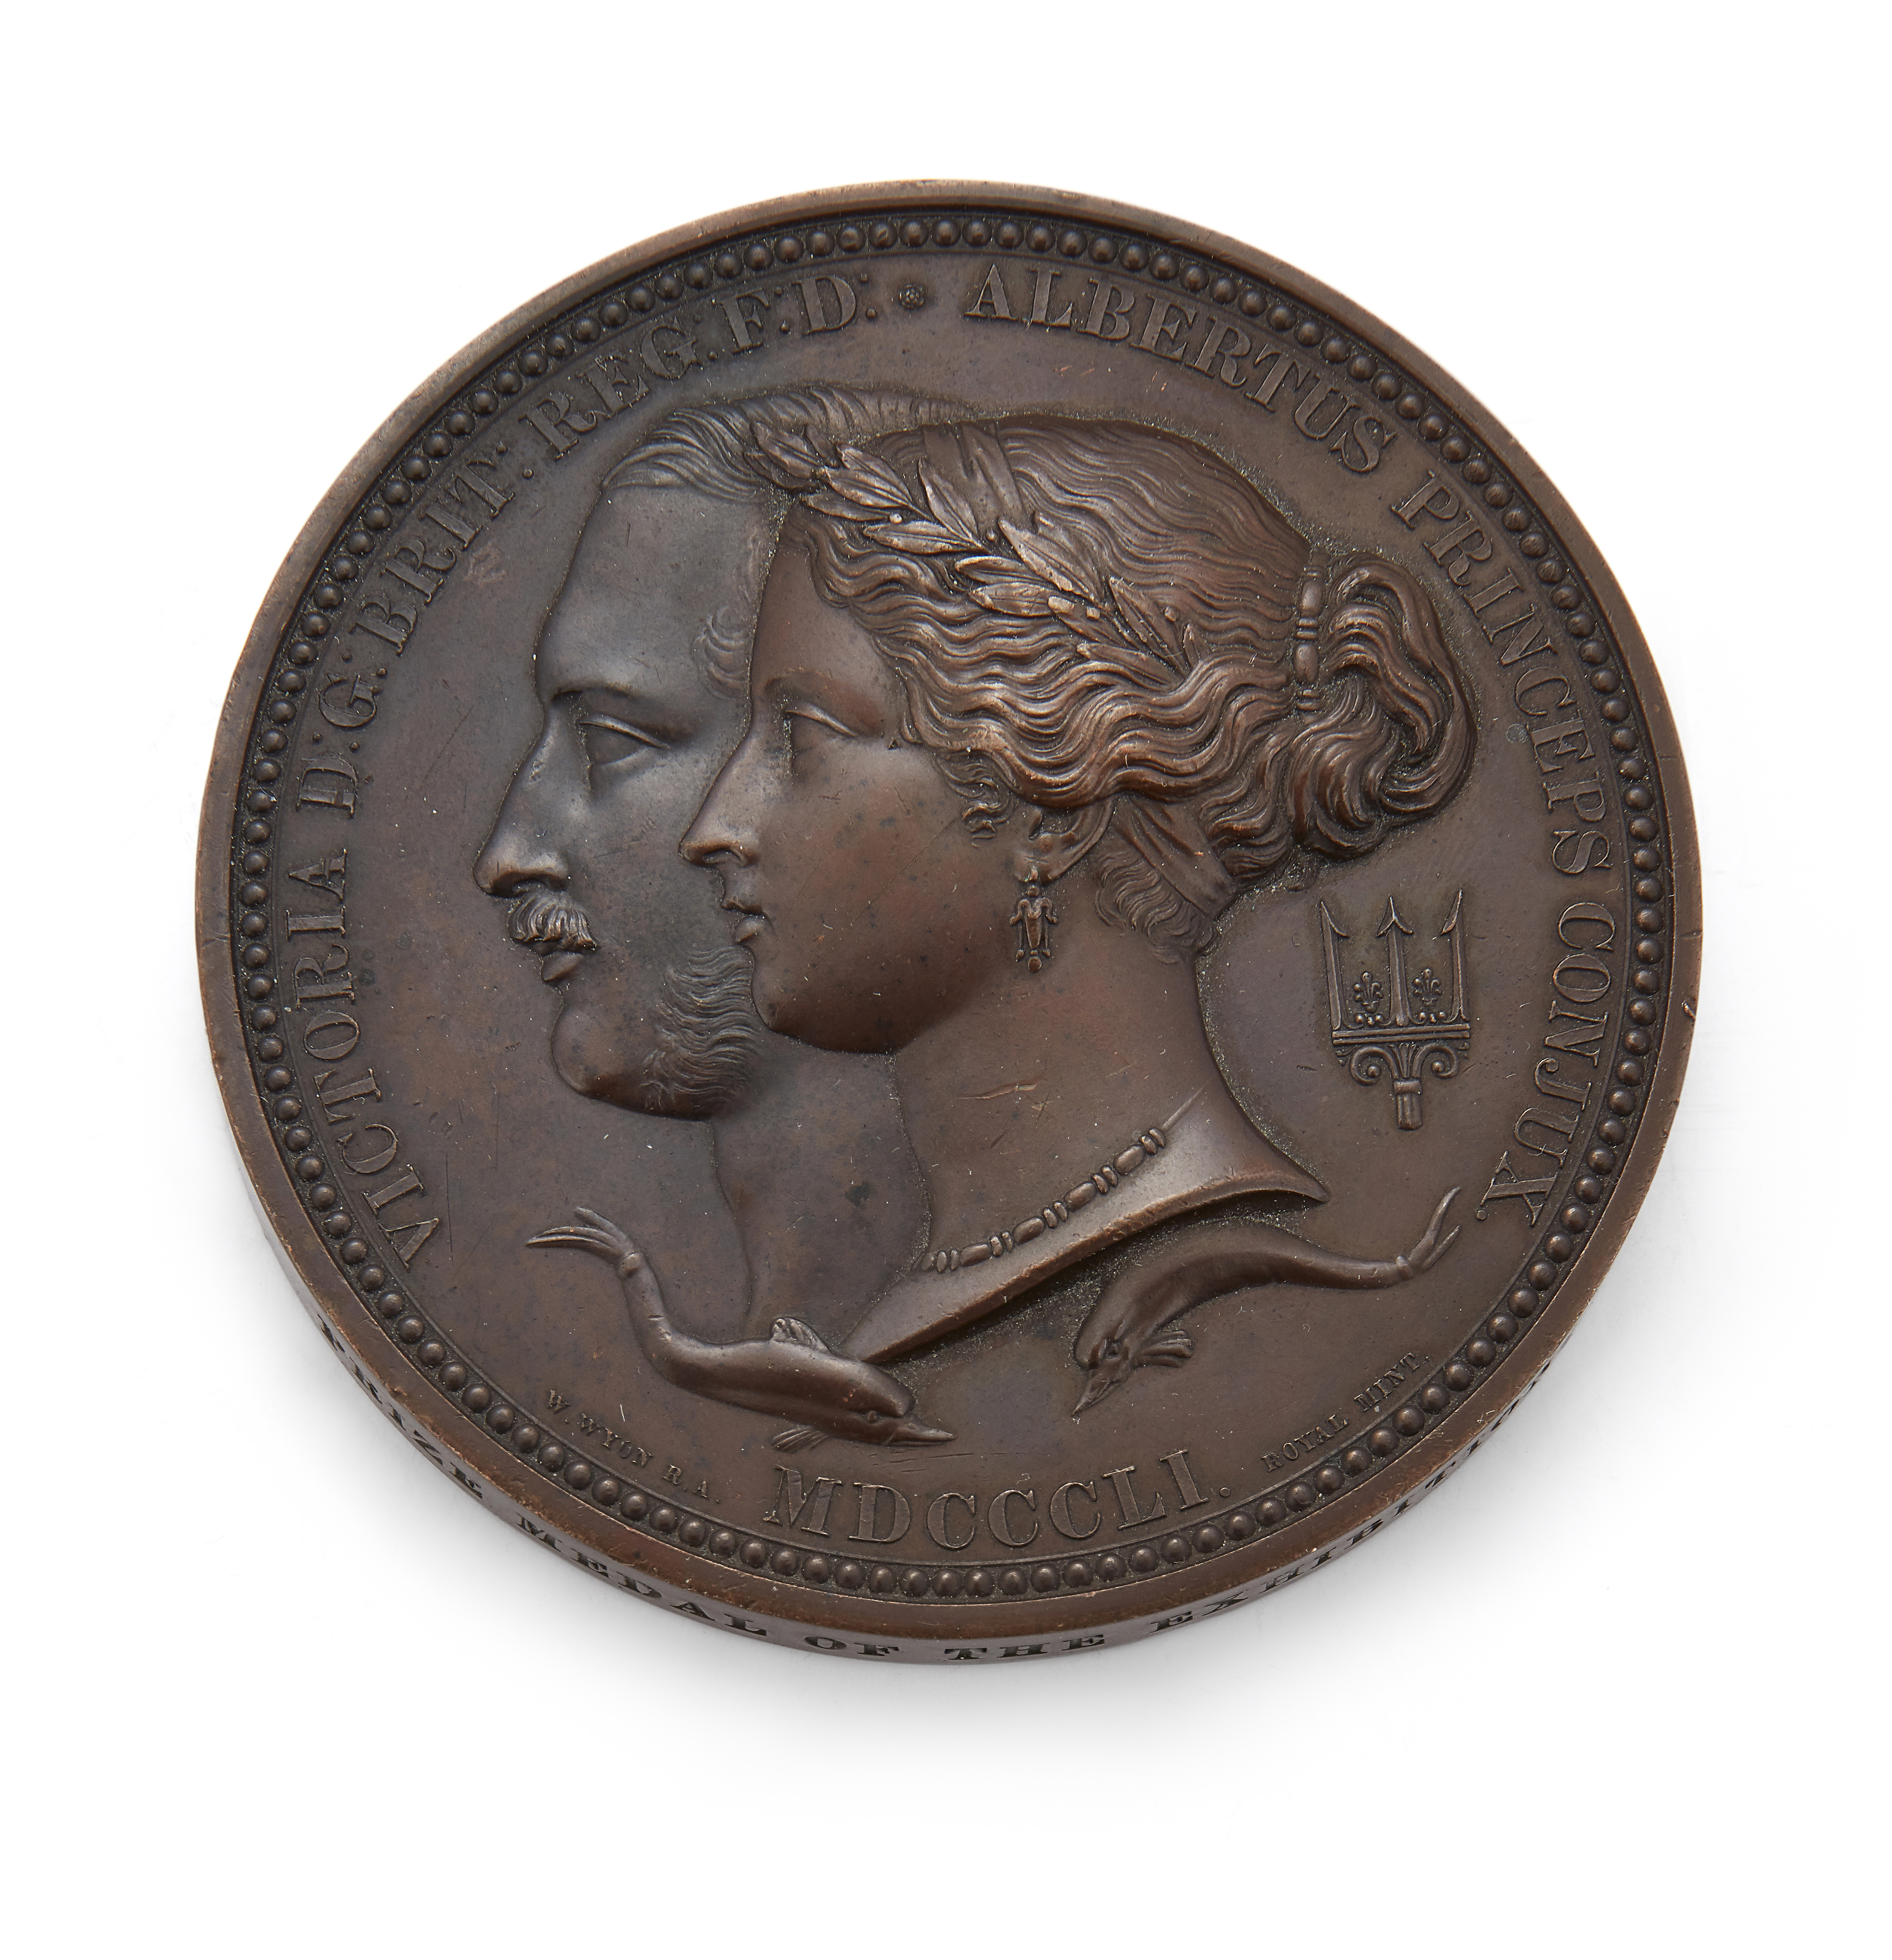 A Great Exhibition of 1851 bronze prize medal, by W. and L. C. Wyon, obverse with conjoined heads...